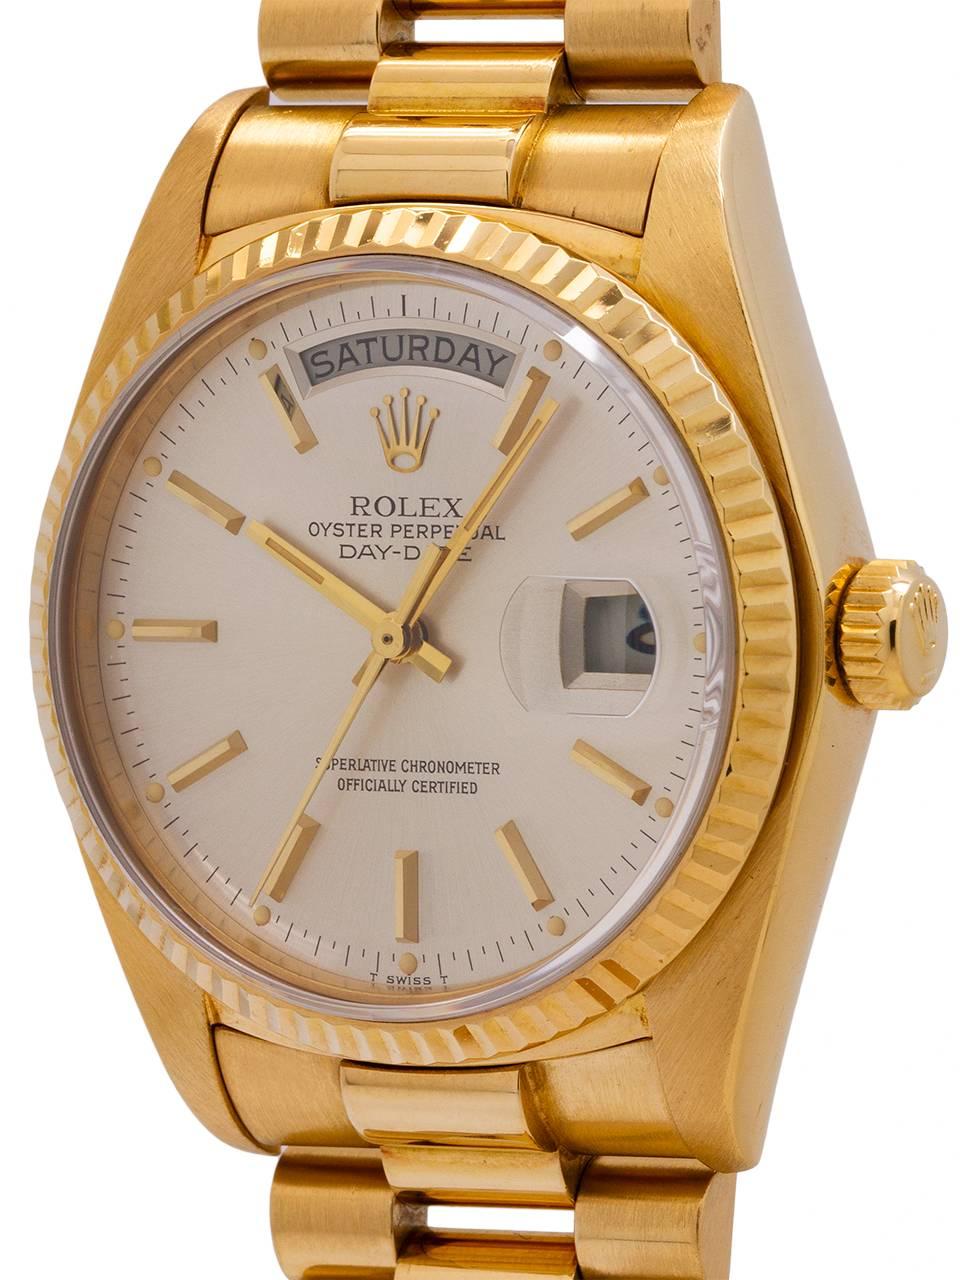 
Rolex ref# 18038 18K YG Day Date President circa 1982. 36mm diameter full size man’s model with sapphire crystal and fluted bezel, with original silvered satin dial with applied gold indexes and gold baton hands. Powered by calibre 3155 movement